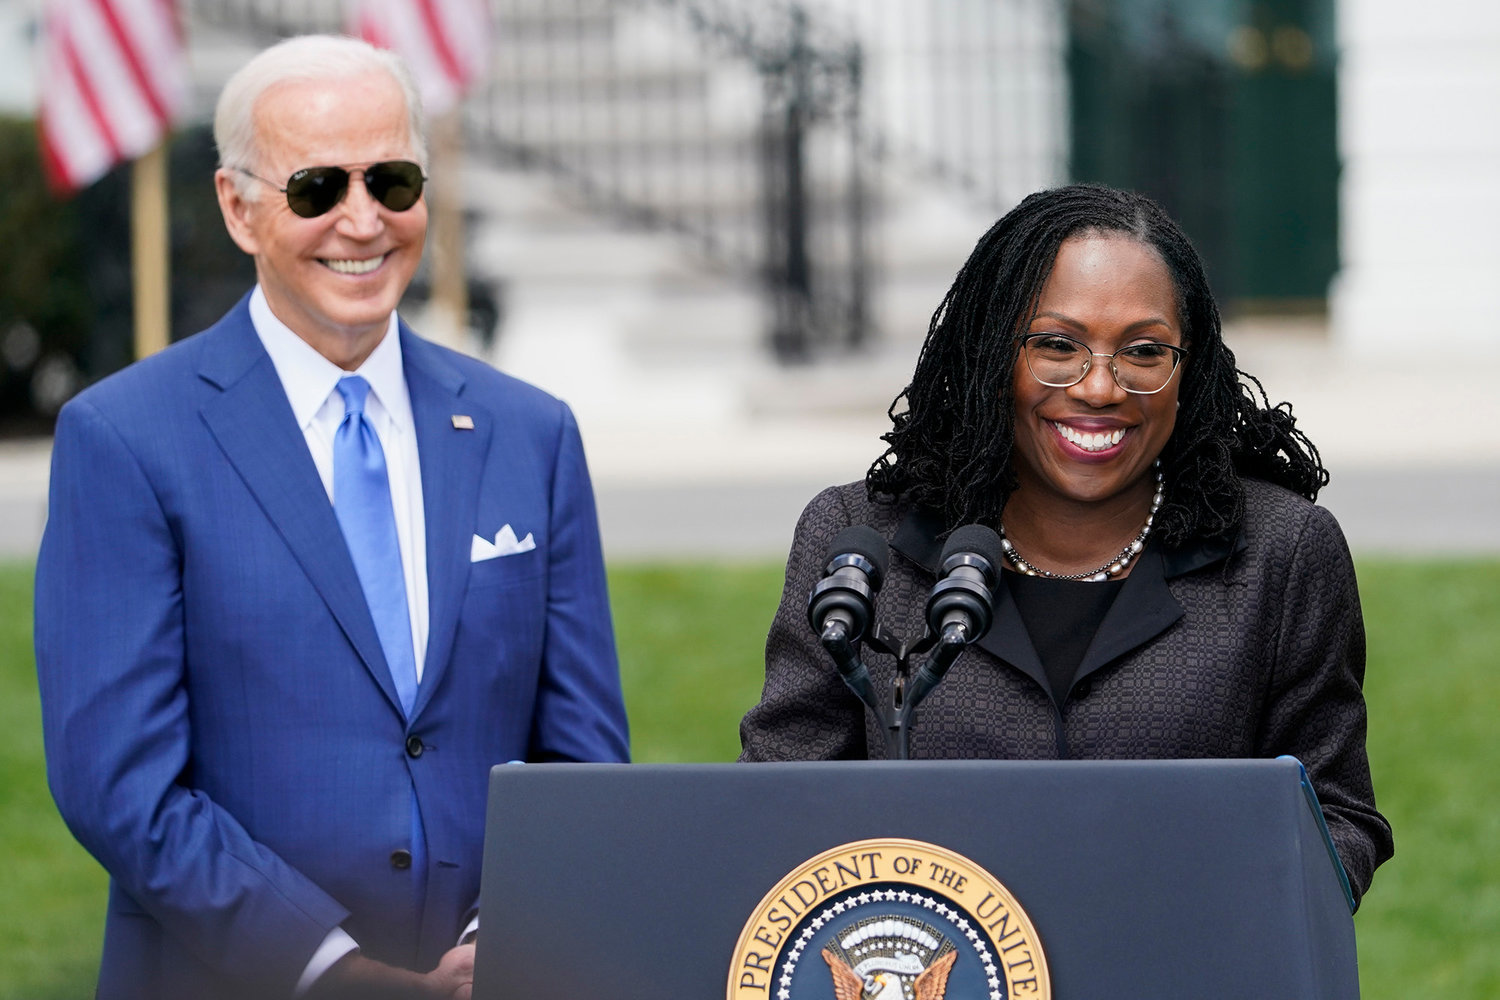 FILE - President Joe Biden listens as Judge Ketanji Brown Jackson speaks during an event on the South Lawn of the White House in Washington, April 8, 2022, celebrating the confirmation of Jackson as the first Black woman to reach the Supreme Court. Overall, 48% of Americans say they approve and 19% disapprove of Jackson’s confirmation to the high court according to the new poll from The Associated Press-NORC Center for Public Affairs Research. The remaining 32% of Americans hold no opinion. (AP Photo/Andrew Harnik, File)